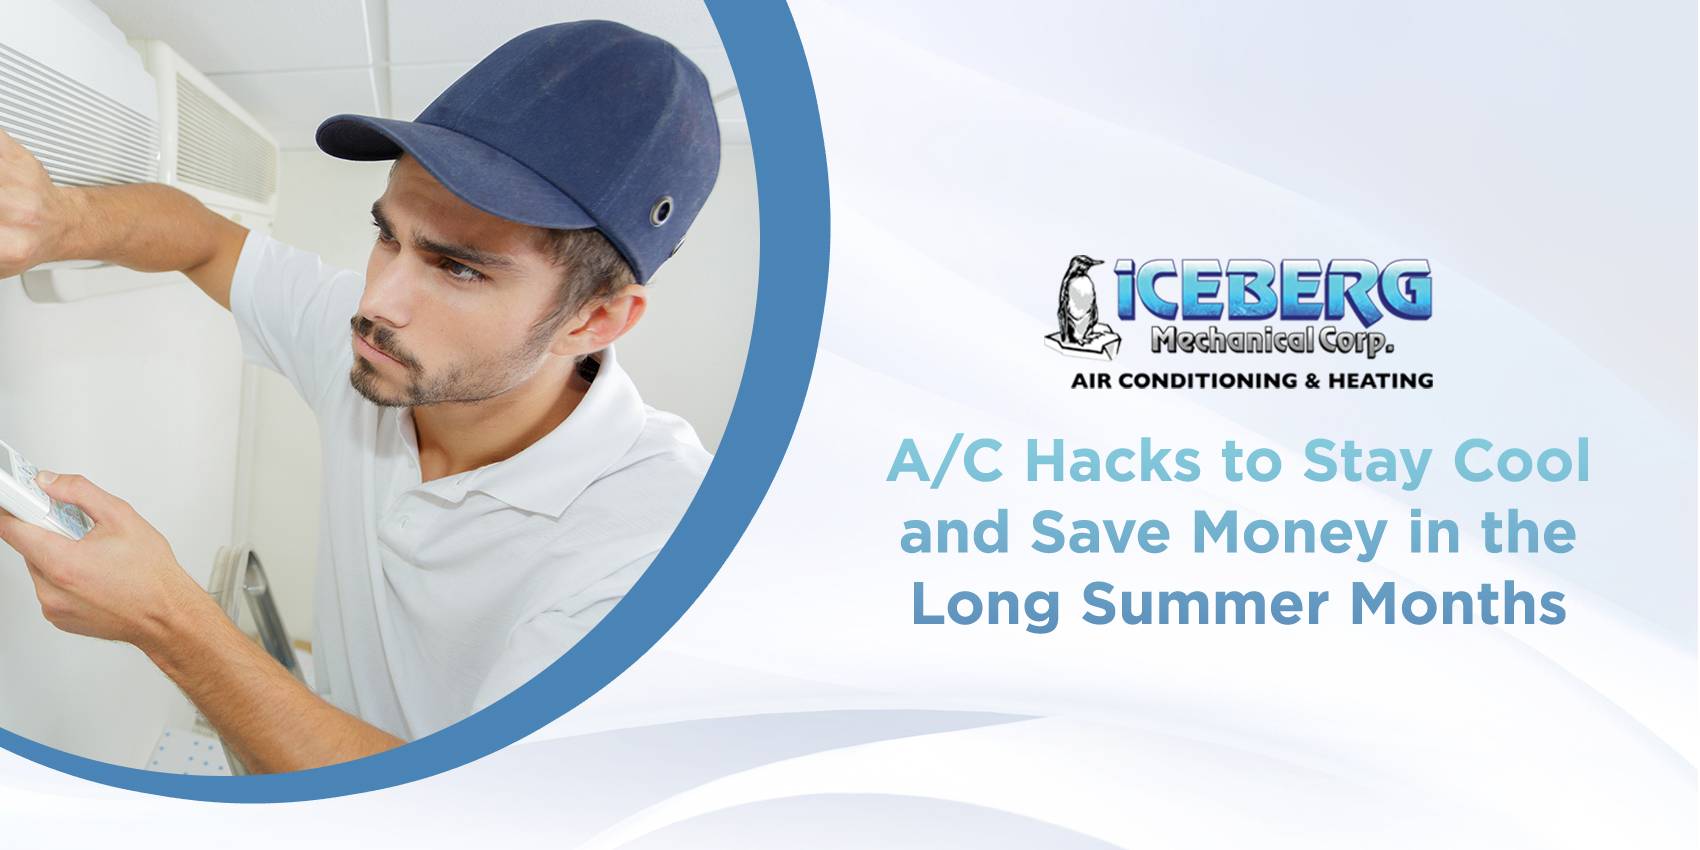 A/C Hacks to Stay Cool and Save Money in the Long Summer Months